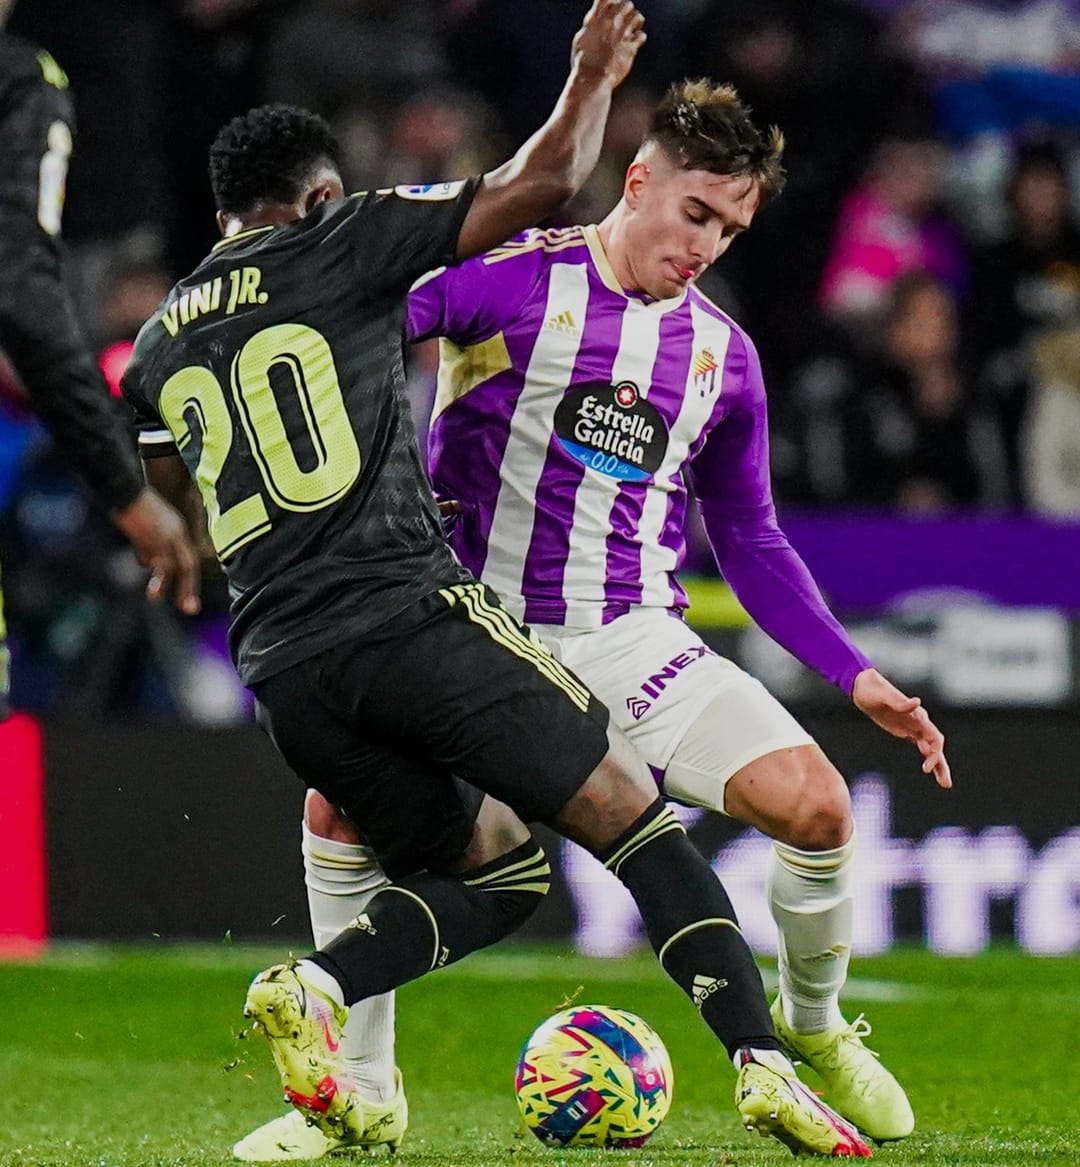 Vinicius and Fresneda fighting for a ball/ Source: Real Valladolid